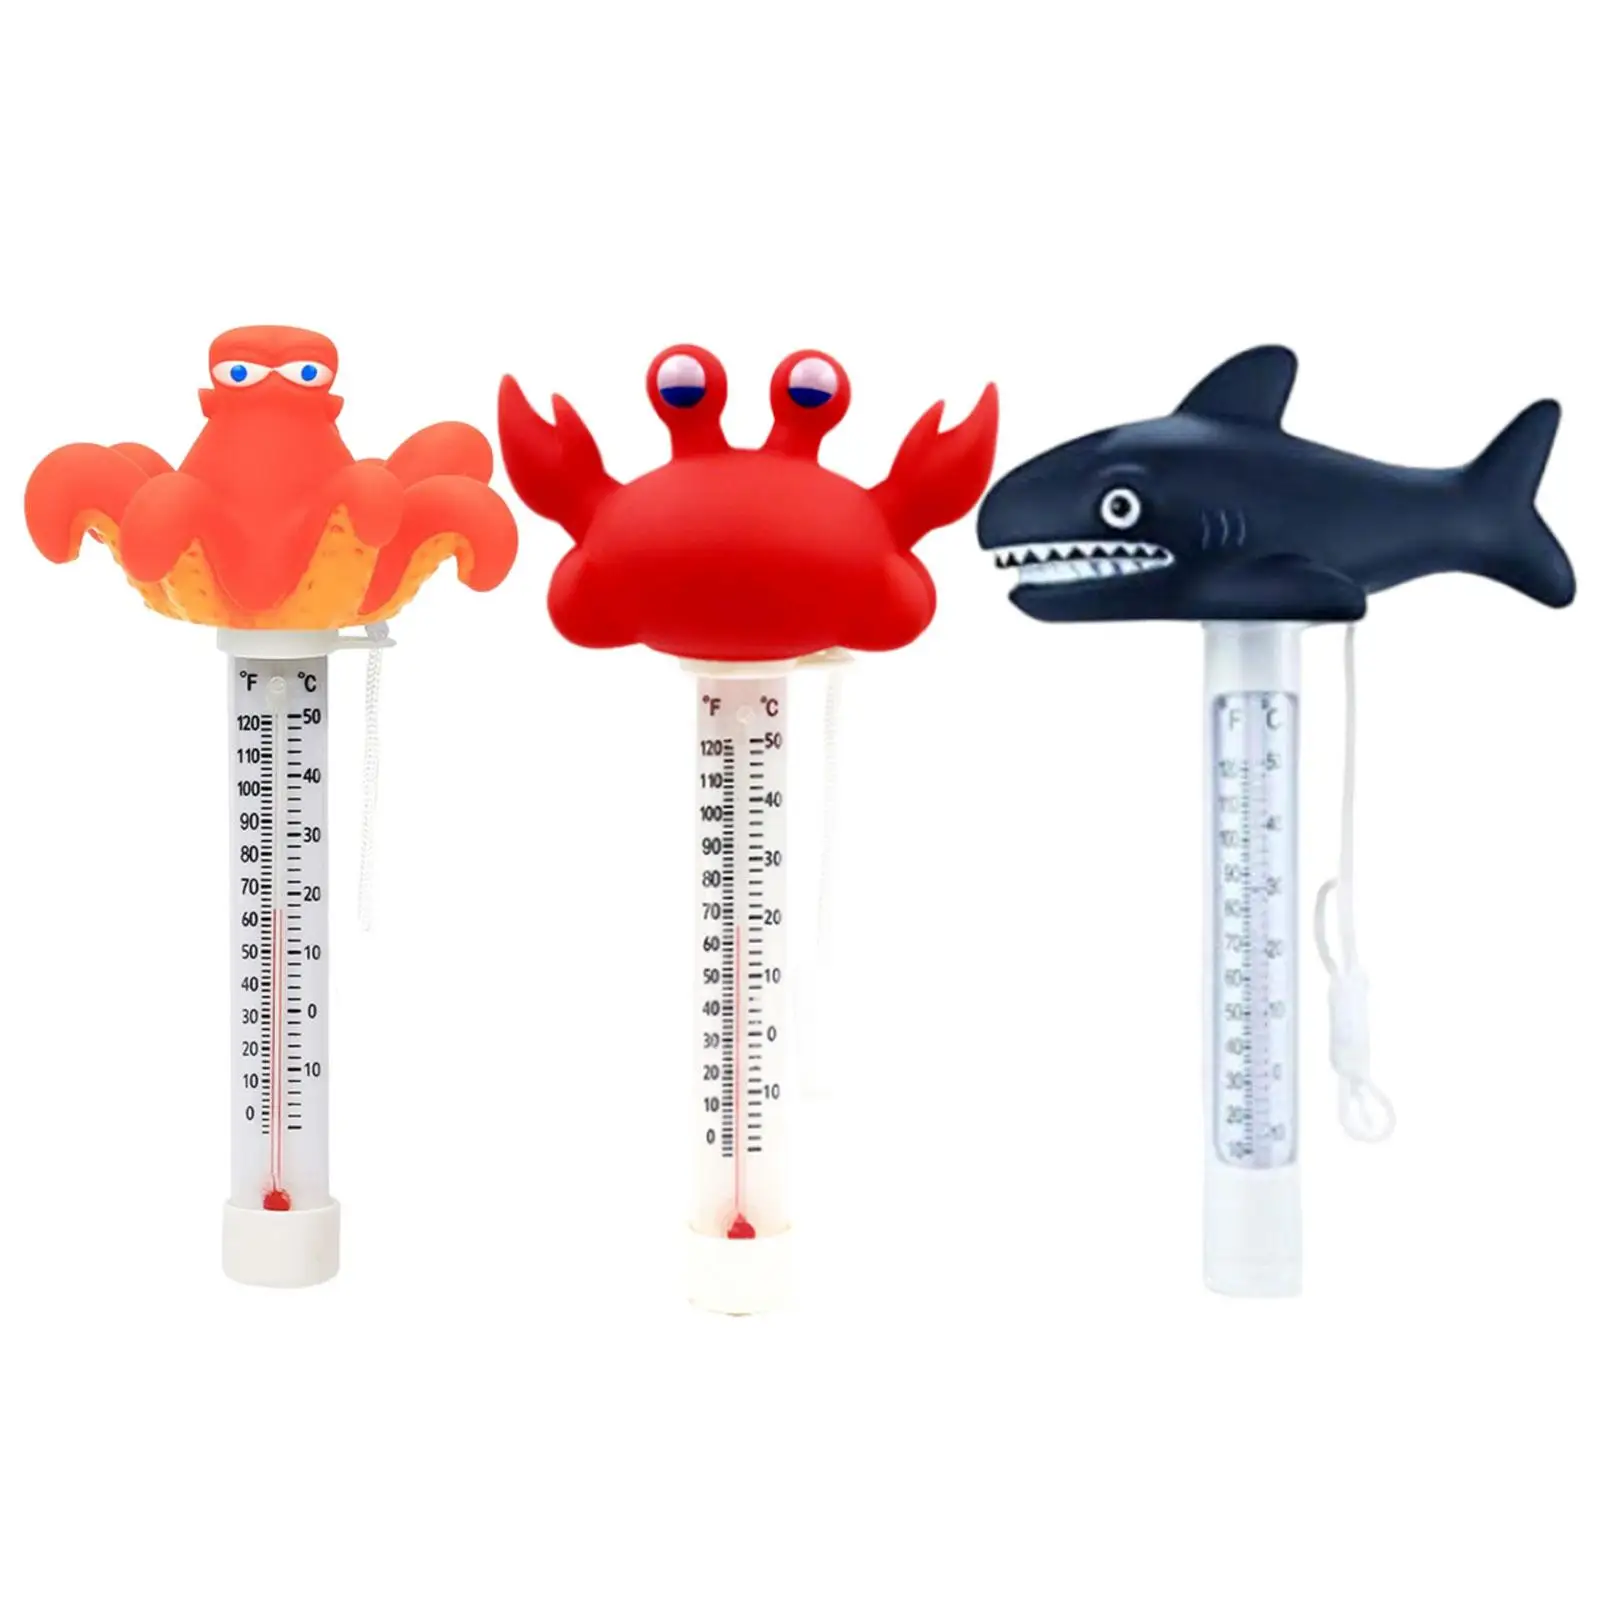 

Floating Swimming Pool Thermometer Portable Aquarium Thermometer Pool Accessories for Aquariums Spas Hot Tubs Fish Ponds